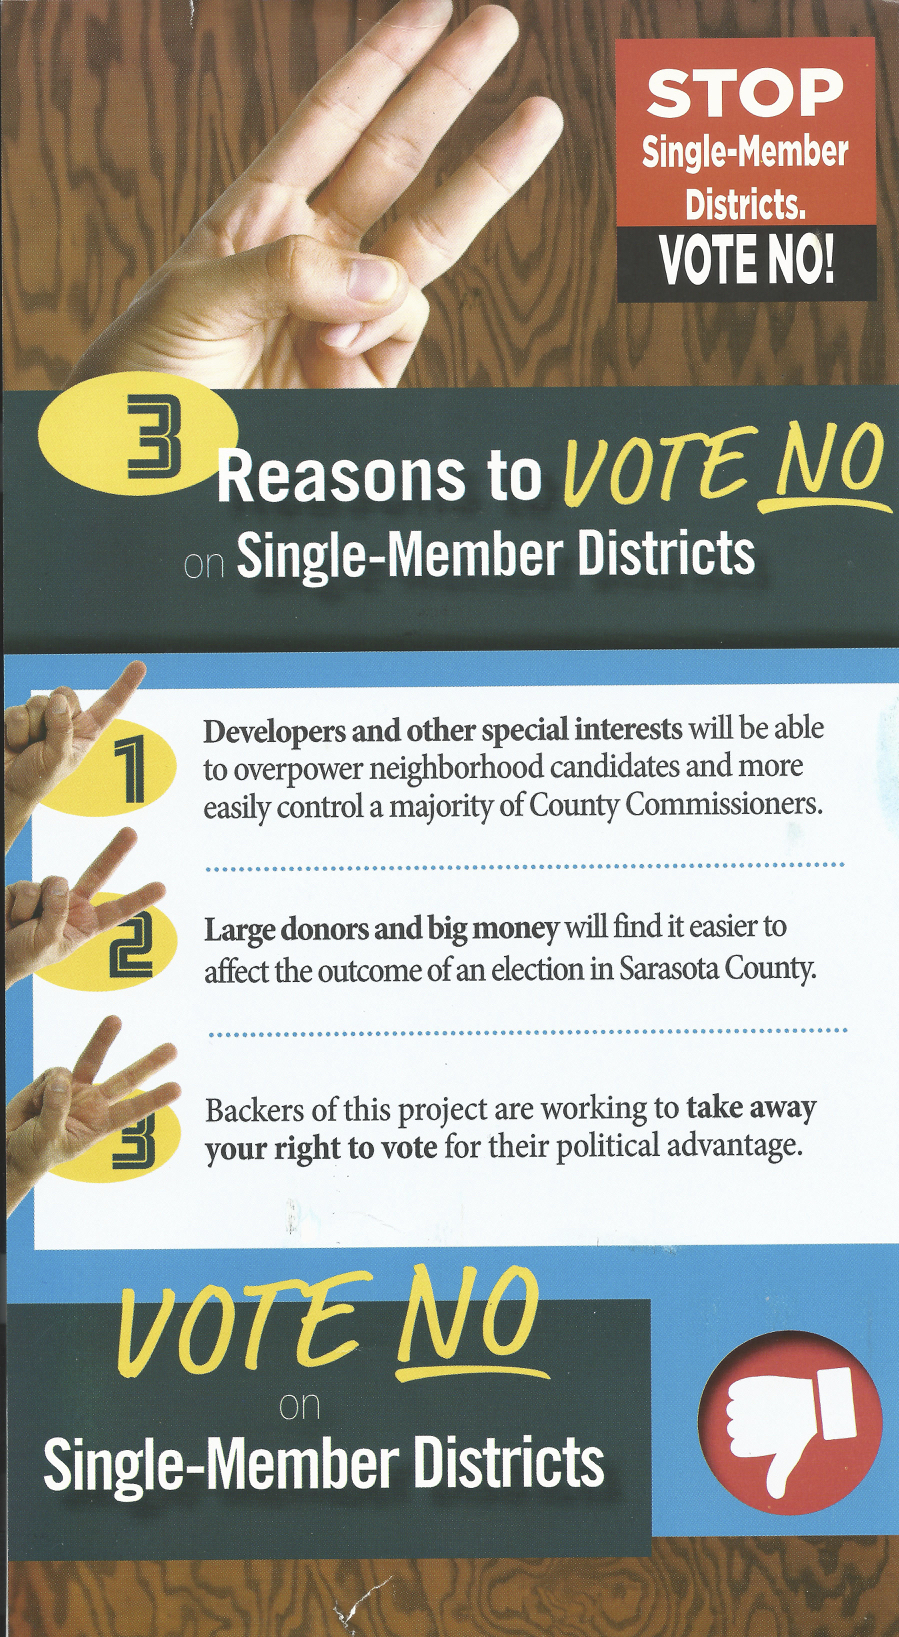 Campaign messaging from Stop! Stealing Our Votes has heavily featured the argument that the change would lead to increased developer influence over county politics.